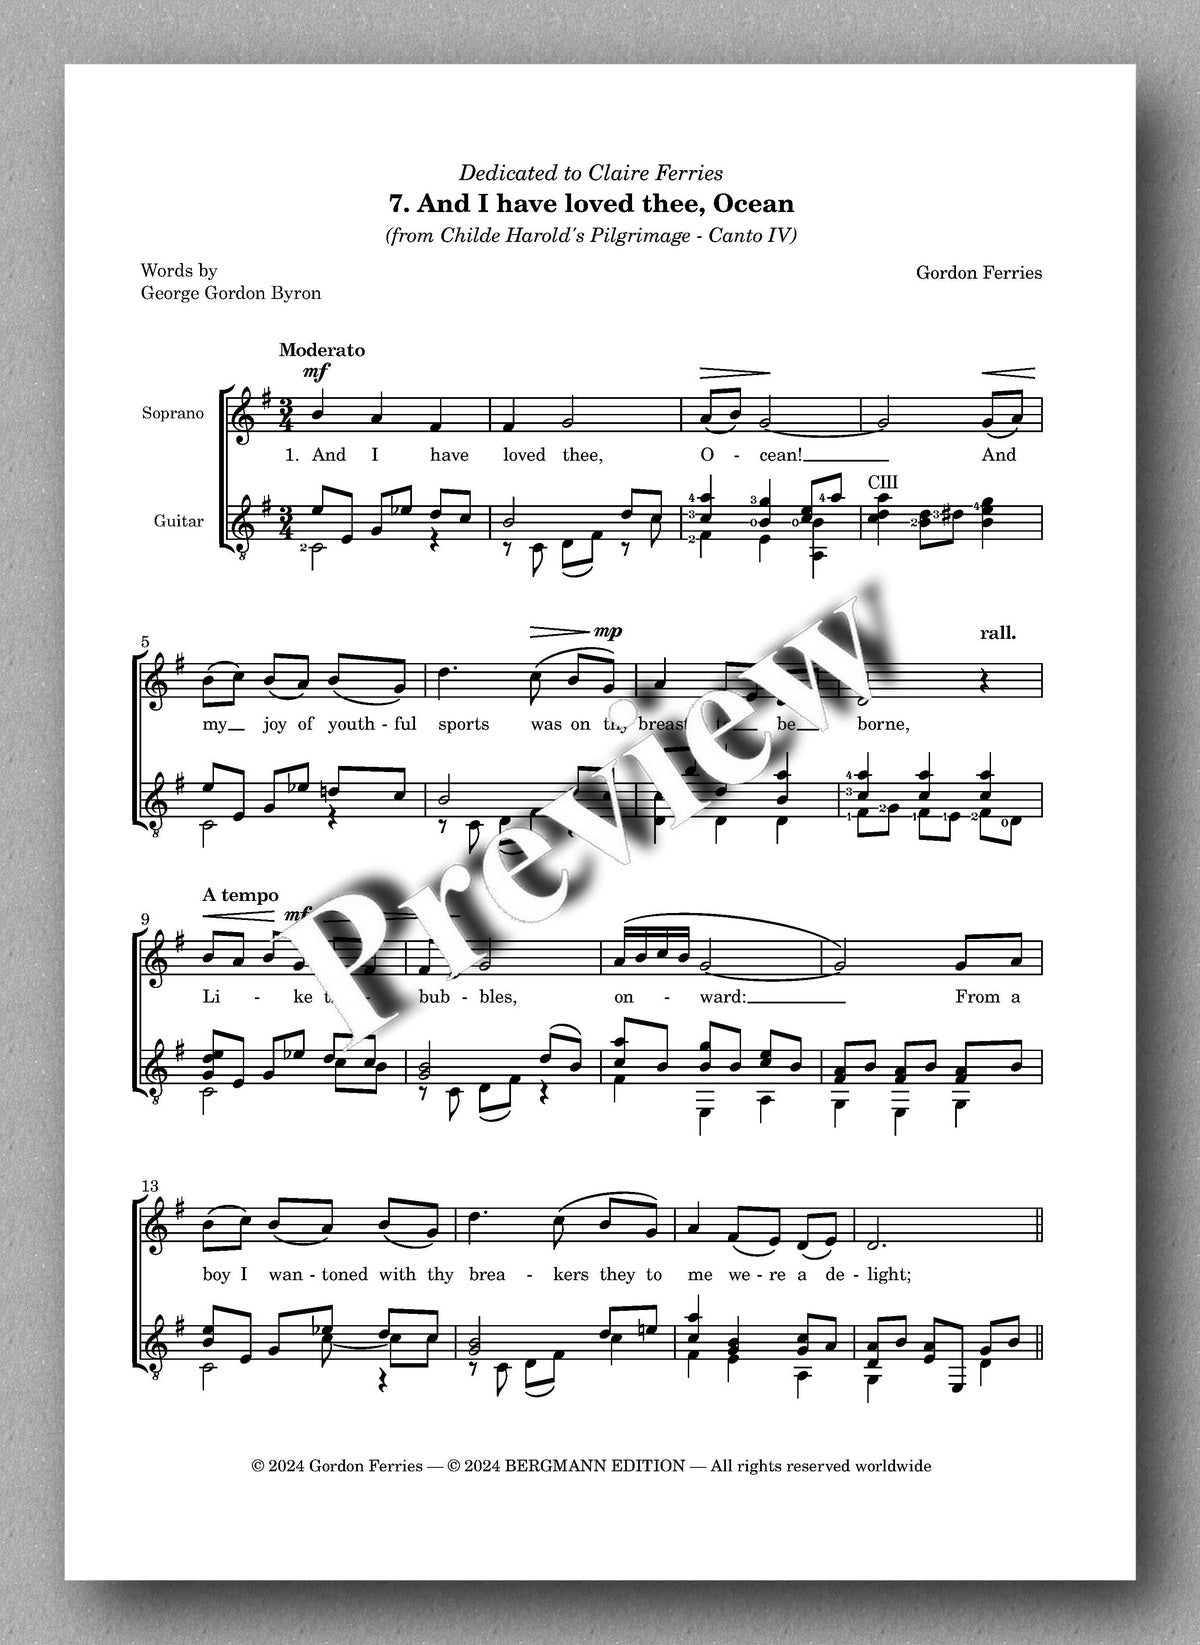 Gordon Ferries, Sun of the Sleepless - preview of the music score 4